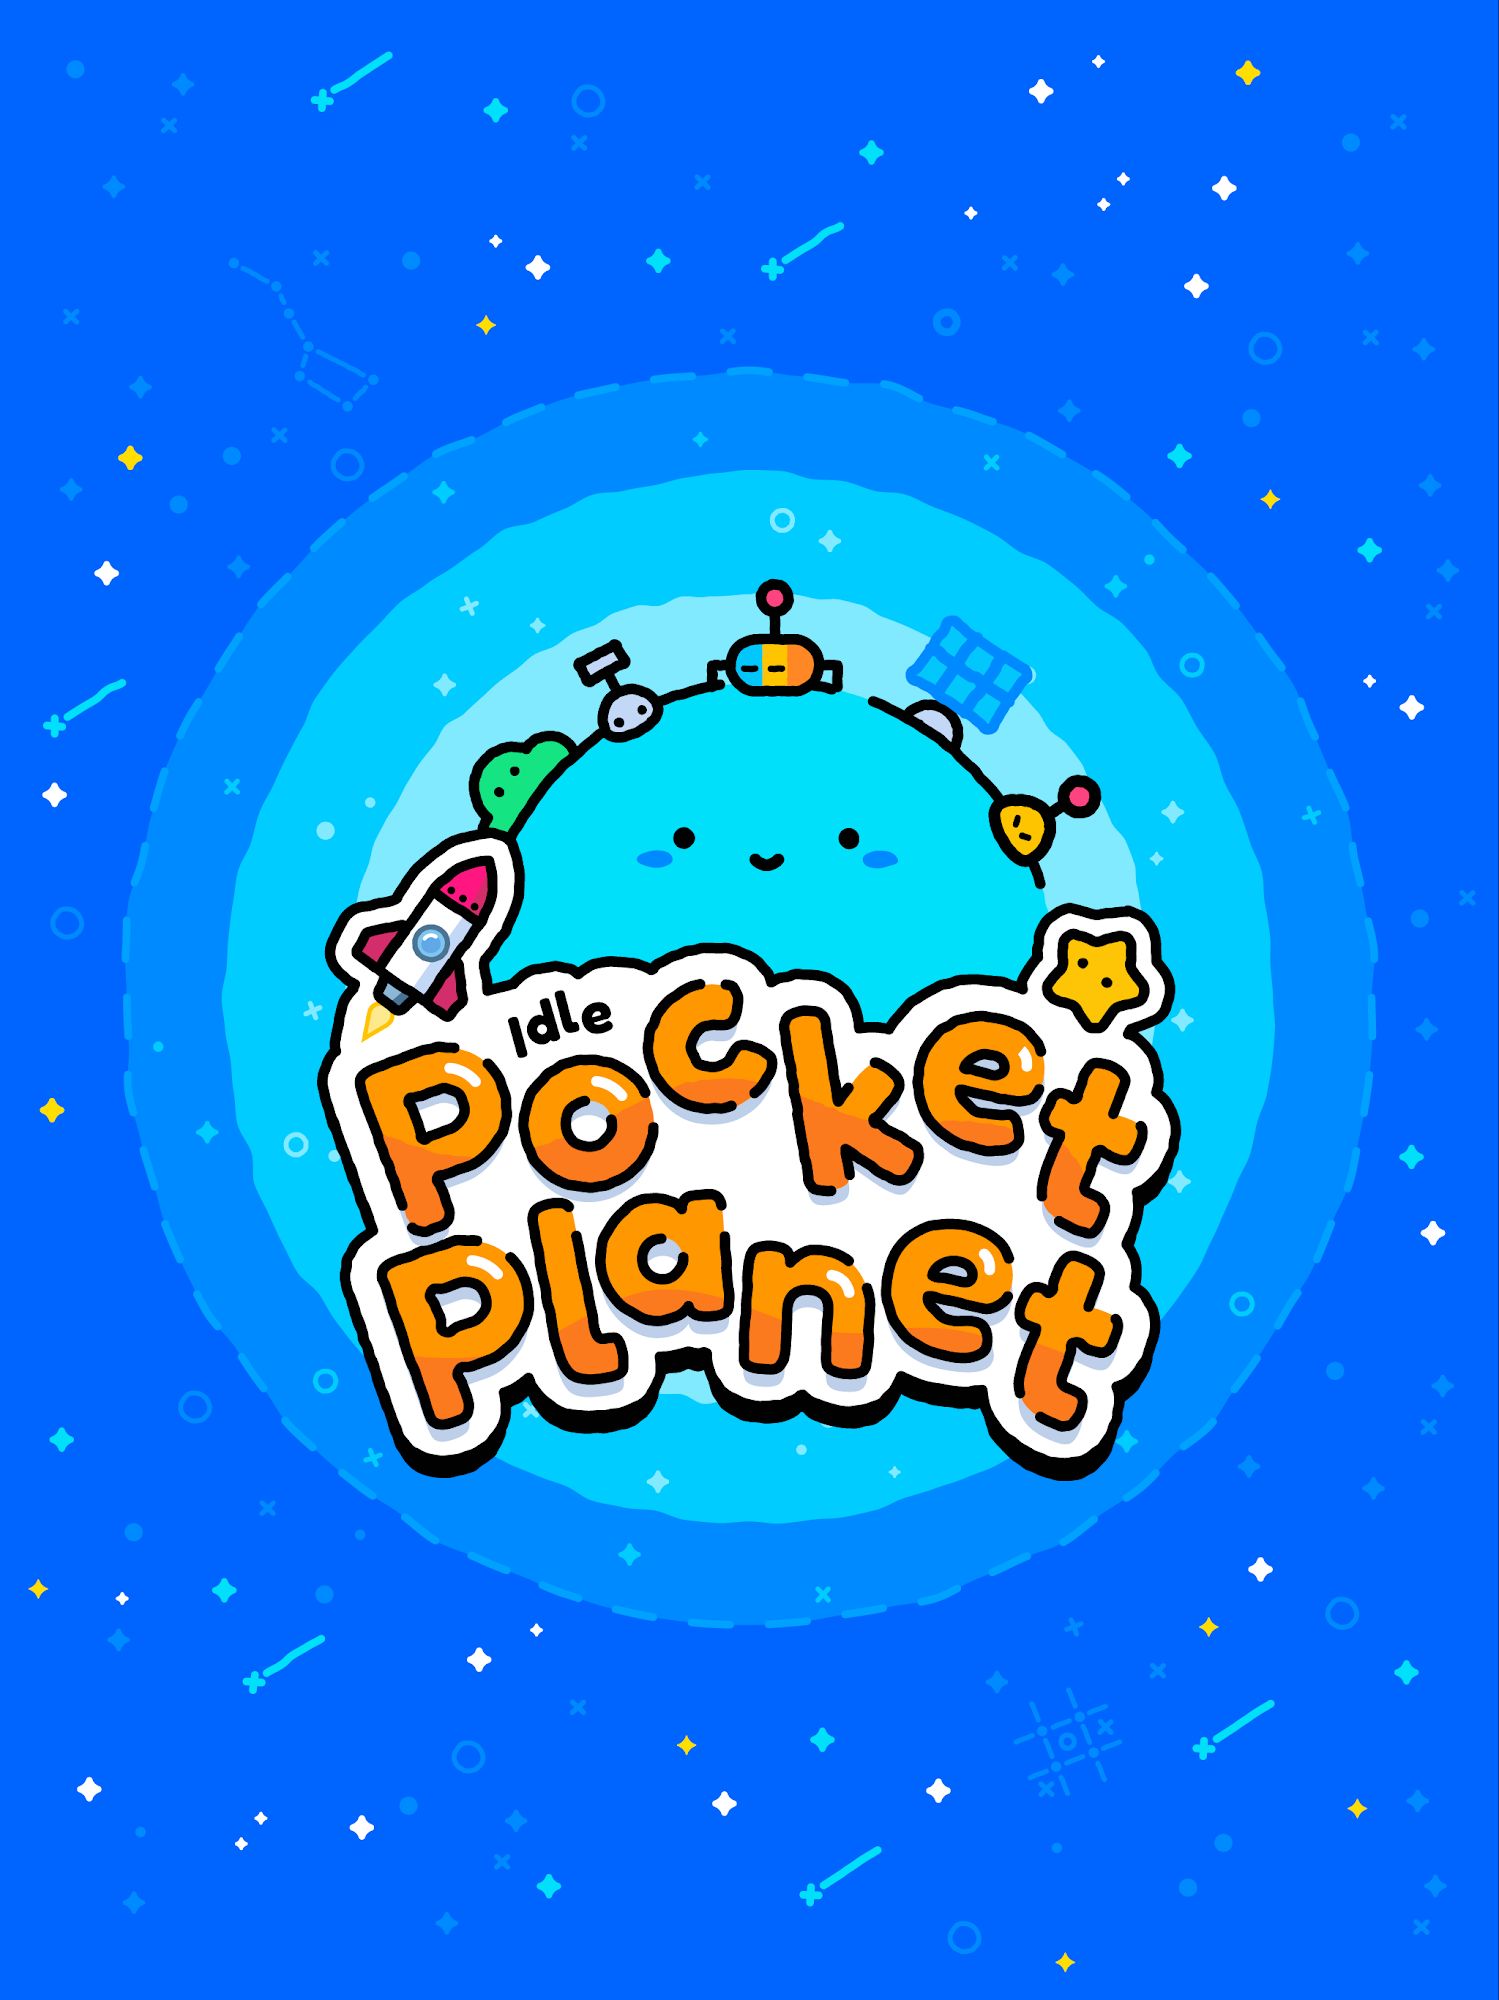 Full version of Android Easy game apk Idle Pocket Planet for tablet and phone.